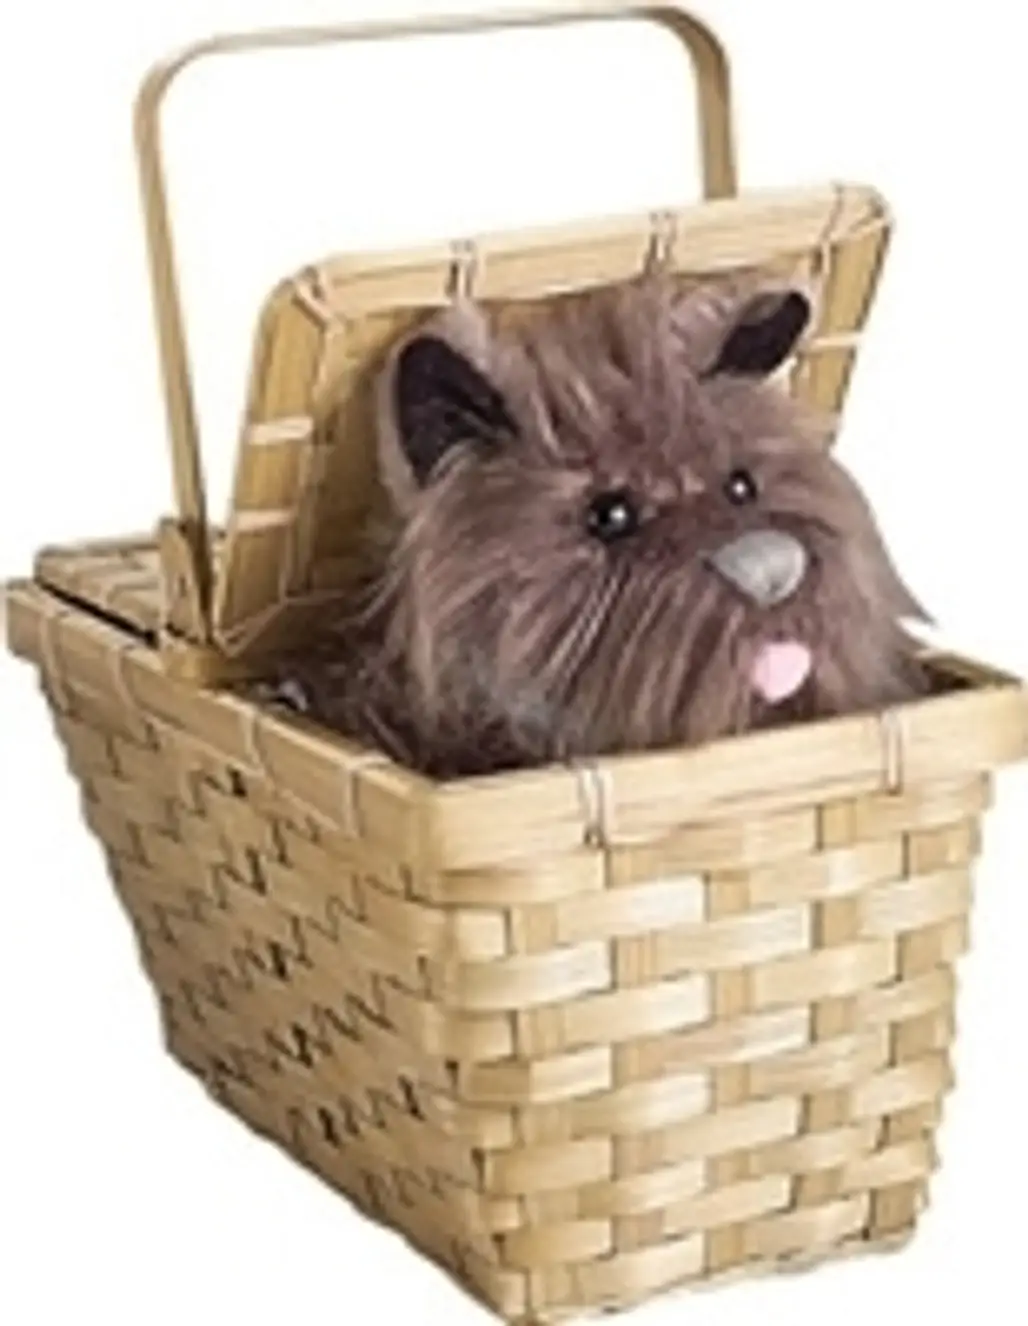 Wizard of Oz Toto in a Basket